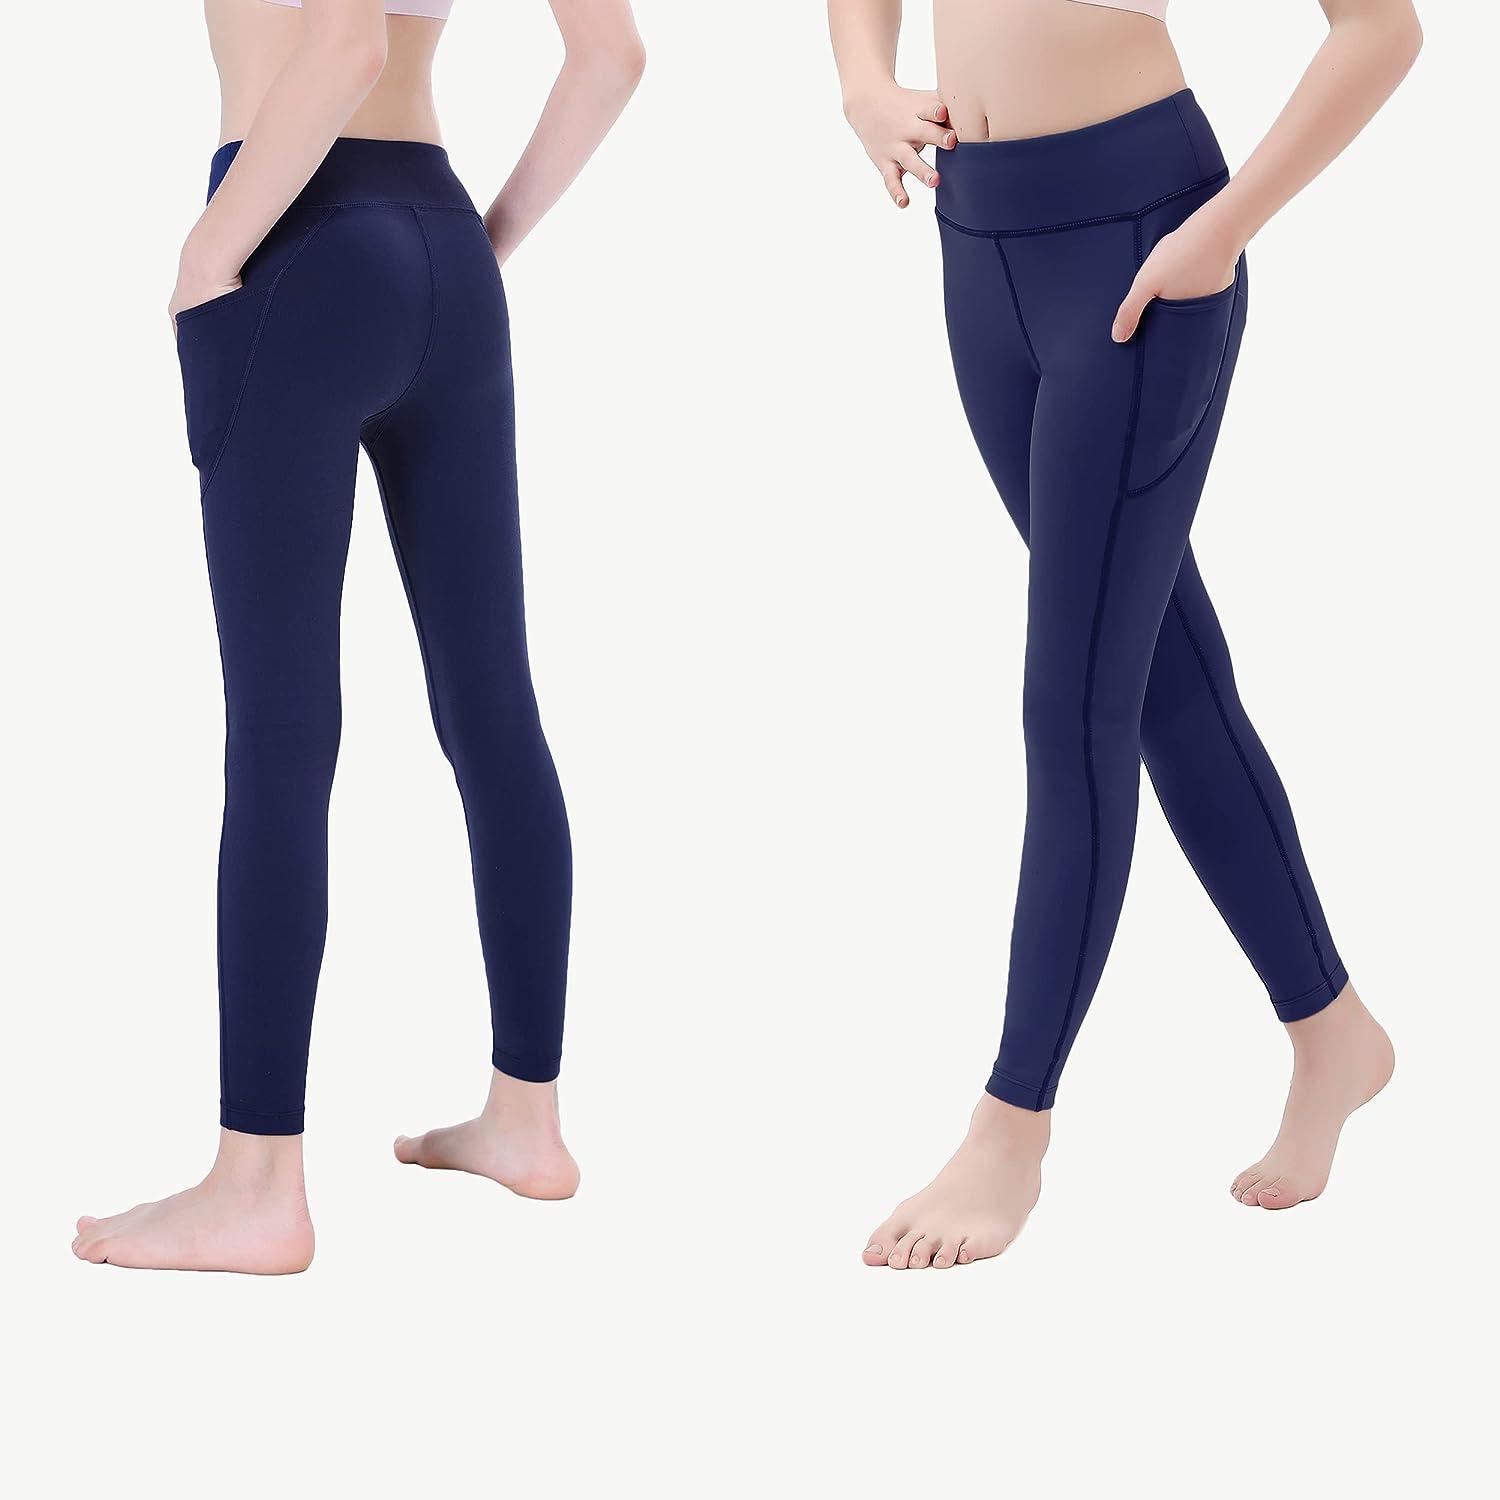 Buy Girl's Athletic Leggings with Pockets Youth Compression Dance Tights  Yoga Pants No Front Seam, Navy Blue, 14 Years at